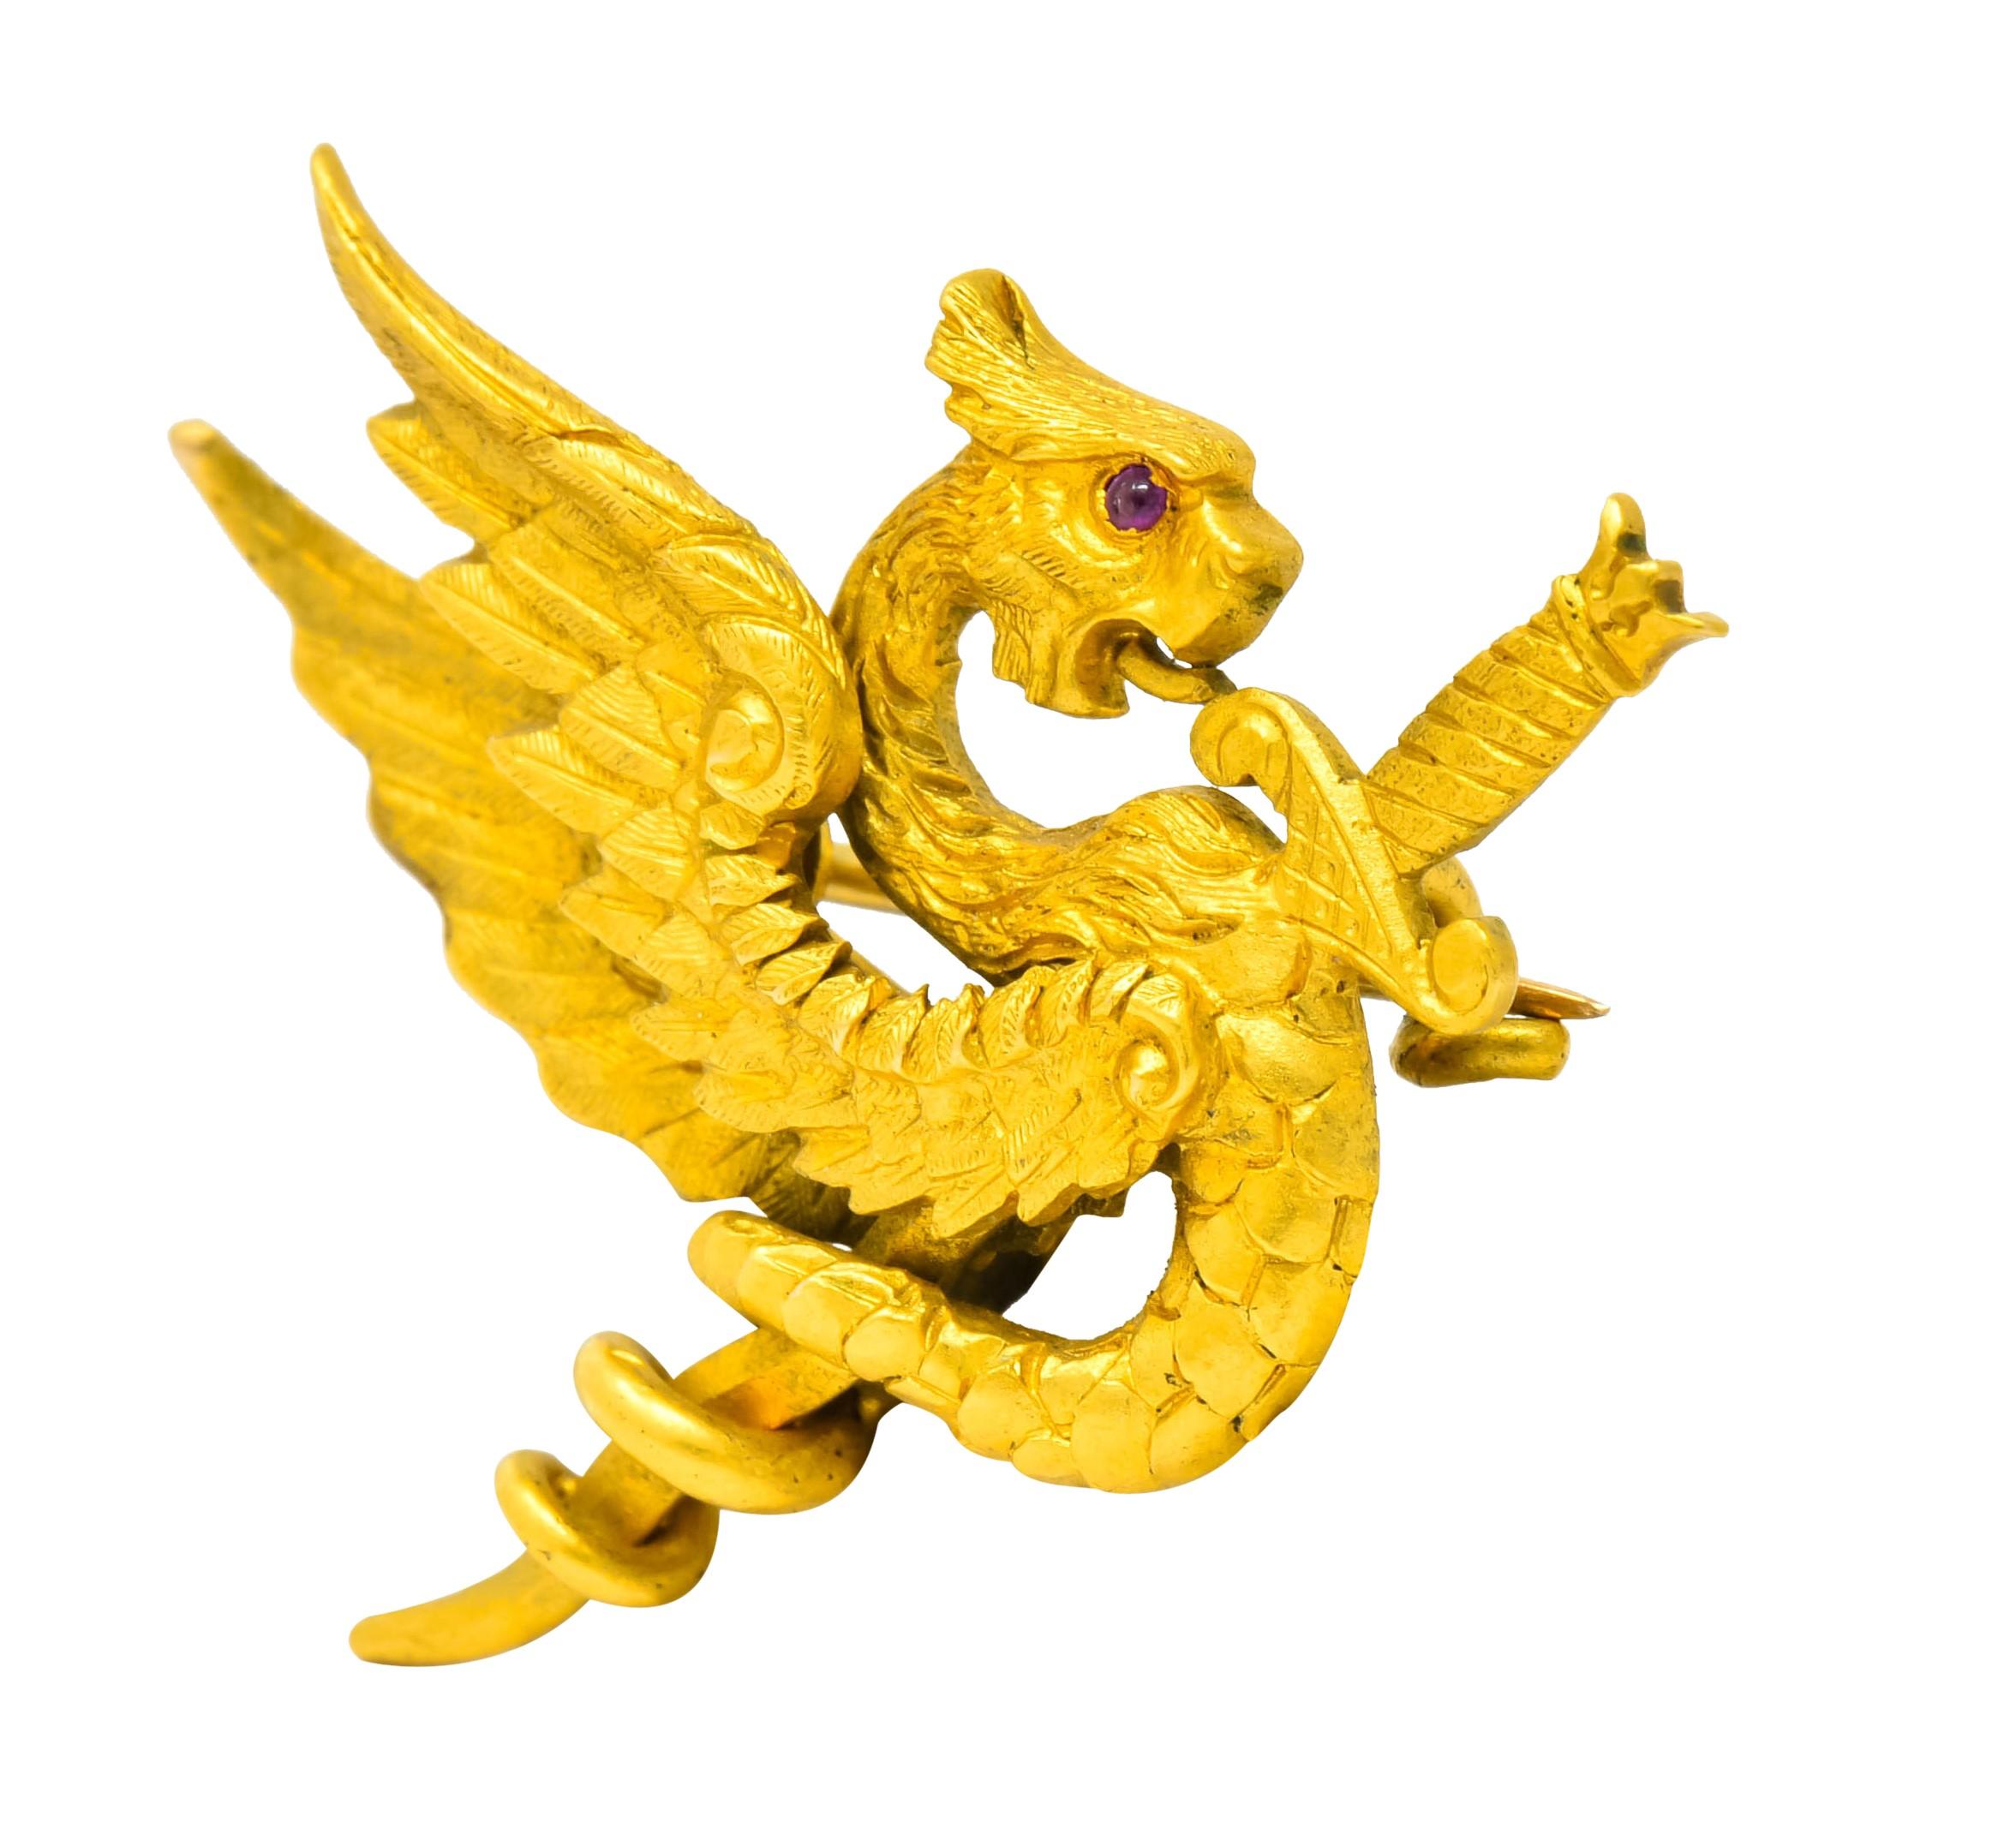 Brooch designed as a fierce winged dragon, highly rendered in matte gold with defined feathers, fur, and scales

With ruby eye accent, a sword thrust through its chest and its serpent tail coiled around the blade

Completed by pin stem and